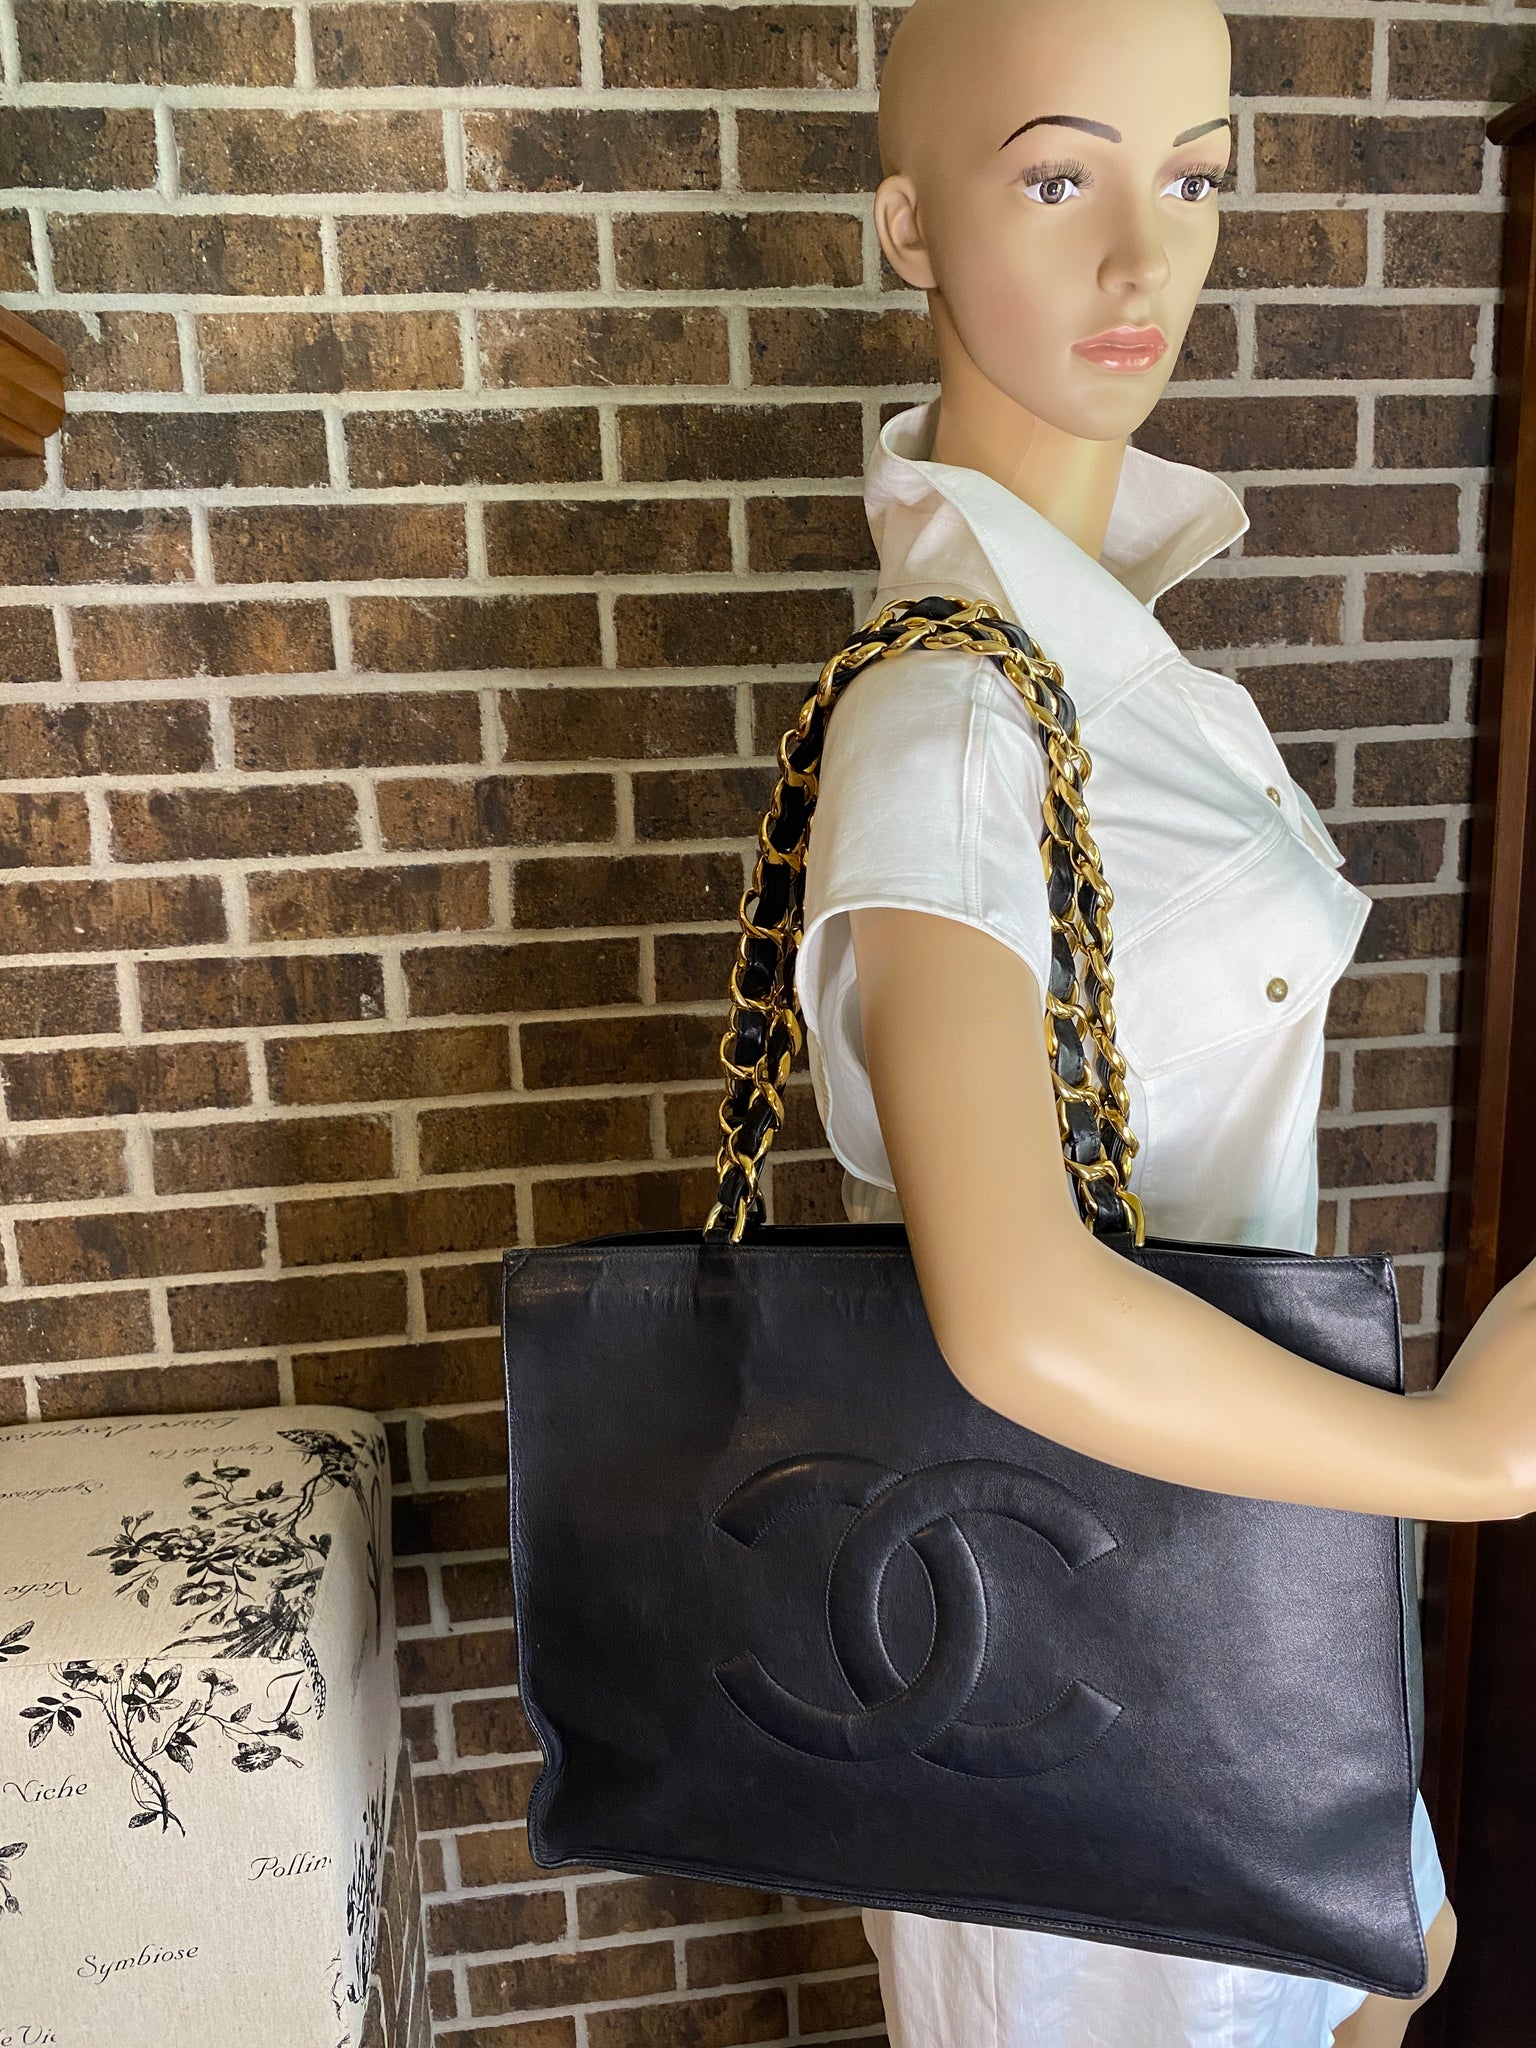 chanel extra large tote bag